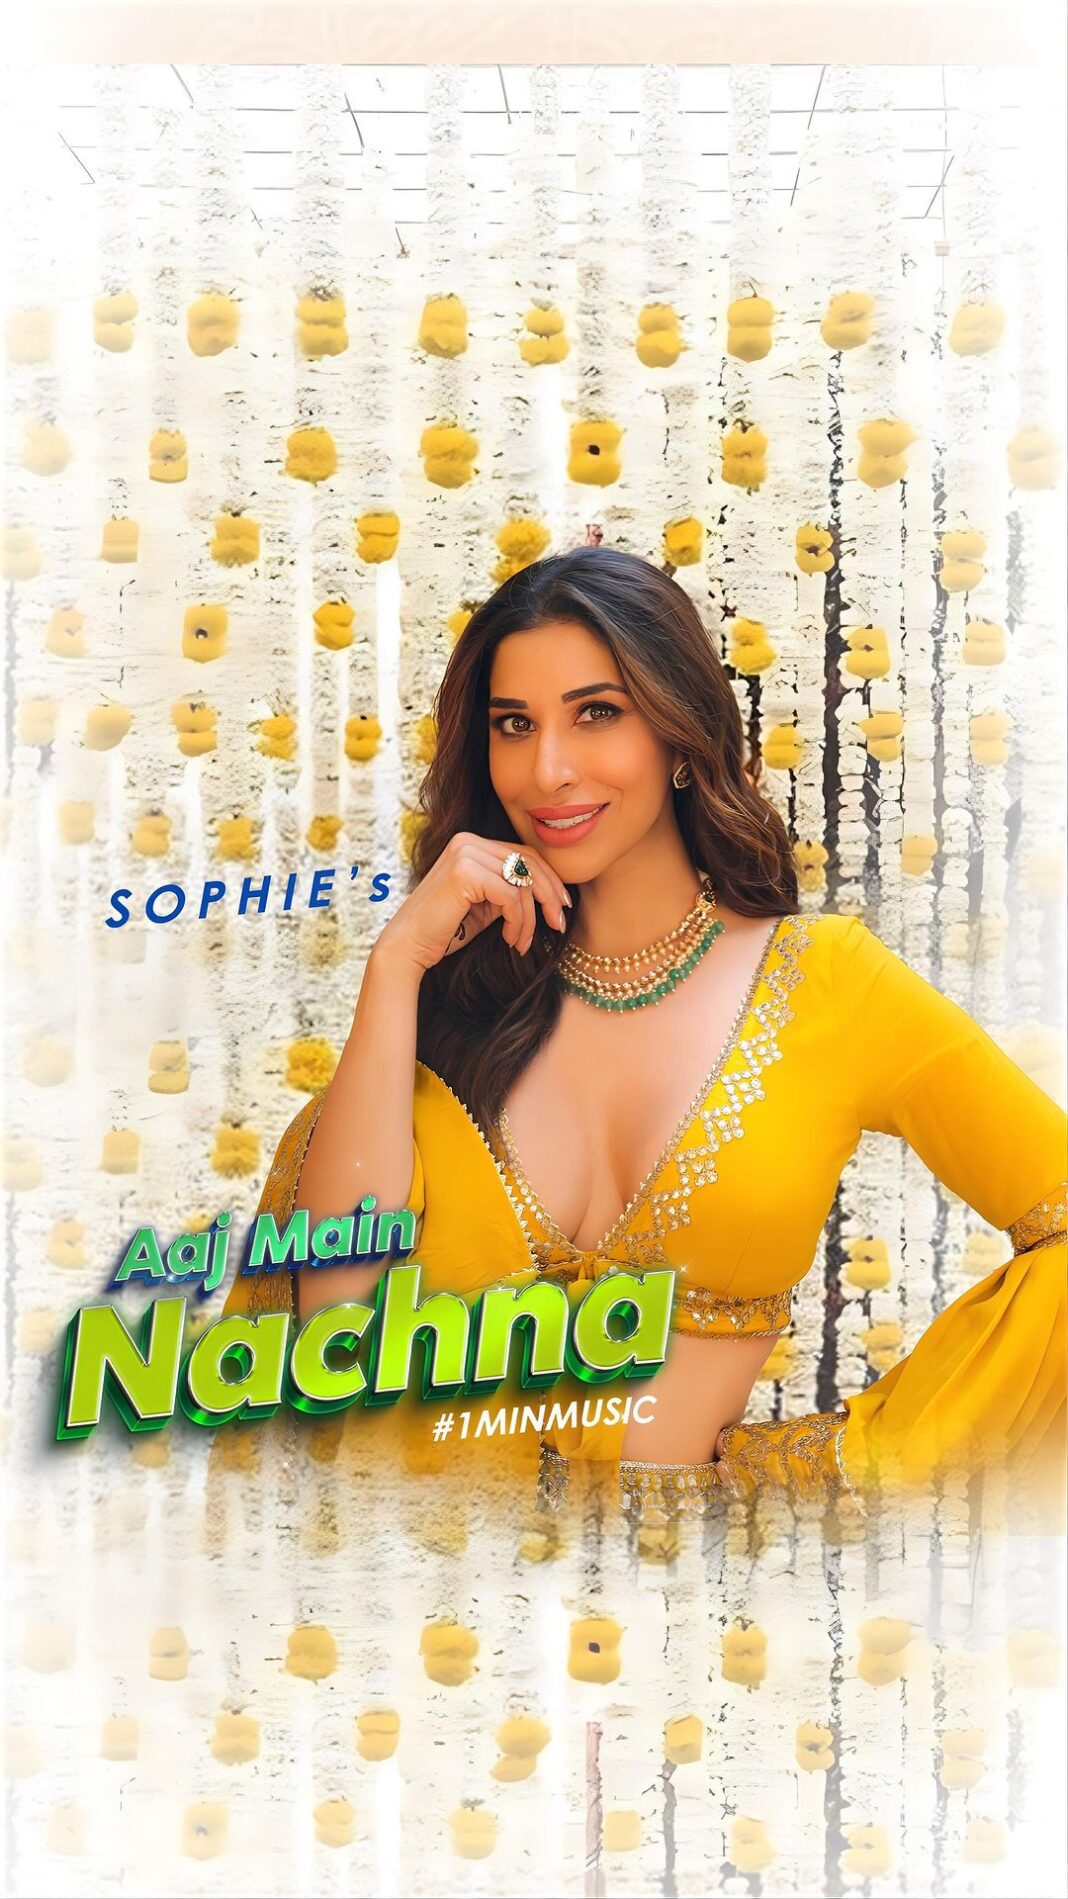 Sophie Choudry Instagram - Aaj Main Nachna is here to win your heart & make you dance this shaadi season!! Need your love for my first ever #1MinMusic 💕 #aajmainnachna #weddingsong #mehndi #trendingsong #sophiechoudry A huge thanku to this incredible team behind the song and video!! Creative director & Editor @adityabhansali_ Co director/EP @siddhant_singhvi @storytellers_management Choreographer @yasshkadamm Location @one8.commune @suved Composer/lyricist @manisha_ojha_ram Producer/Arranger @gosavimontu Rhythm arrangement @hanifaslam_official Recorded by @rhsharma504 Mixed and Mastered by @tosiefshaikh HMU @divyachablani15 @tinamukharjee Styled by @mohitrai with @shrey_vaishnav_ Look 1 Outfit @gopivaiddesigns Jewellery @curiocottagejewelry Look 2 Outfit @svacouture Jewellery @motifsbysurabhididwania Look 3 Outfit @itrhofficial Jewellery @karishma.joolry Art director @_eye.for.beauty_ Dancers styling @styled.by.urvi Special thanks to @aachho @dinky_nirh Dancers @chinmayee19 @__sakshi2204 @alyonaatalukdar_thedancer @ishasawant_ @aankitaguptaa Poster design @hslstudios (Samdish Sandhu)